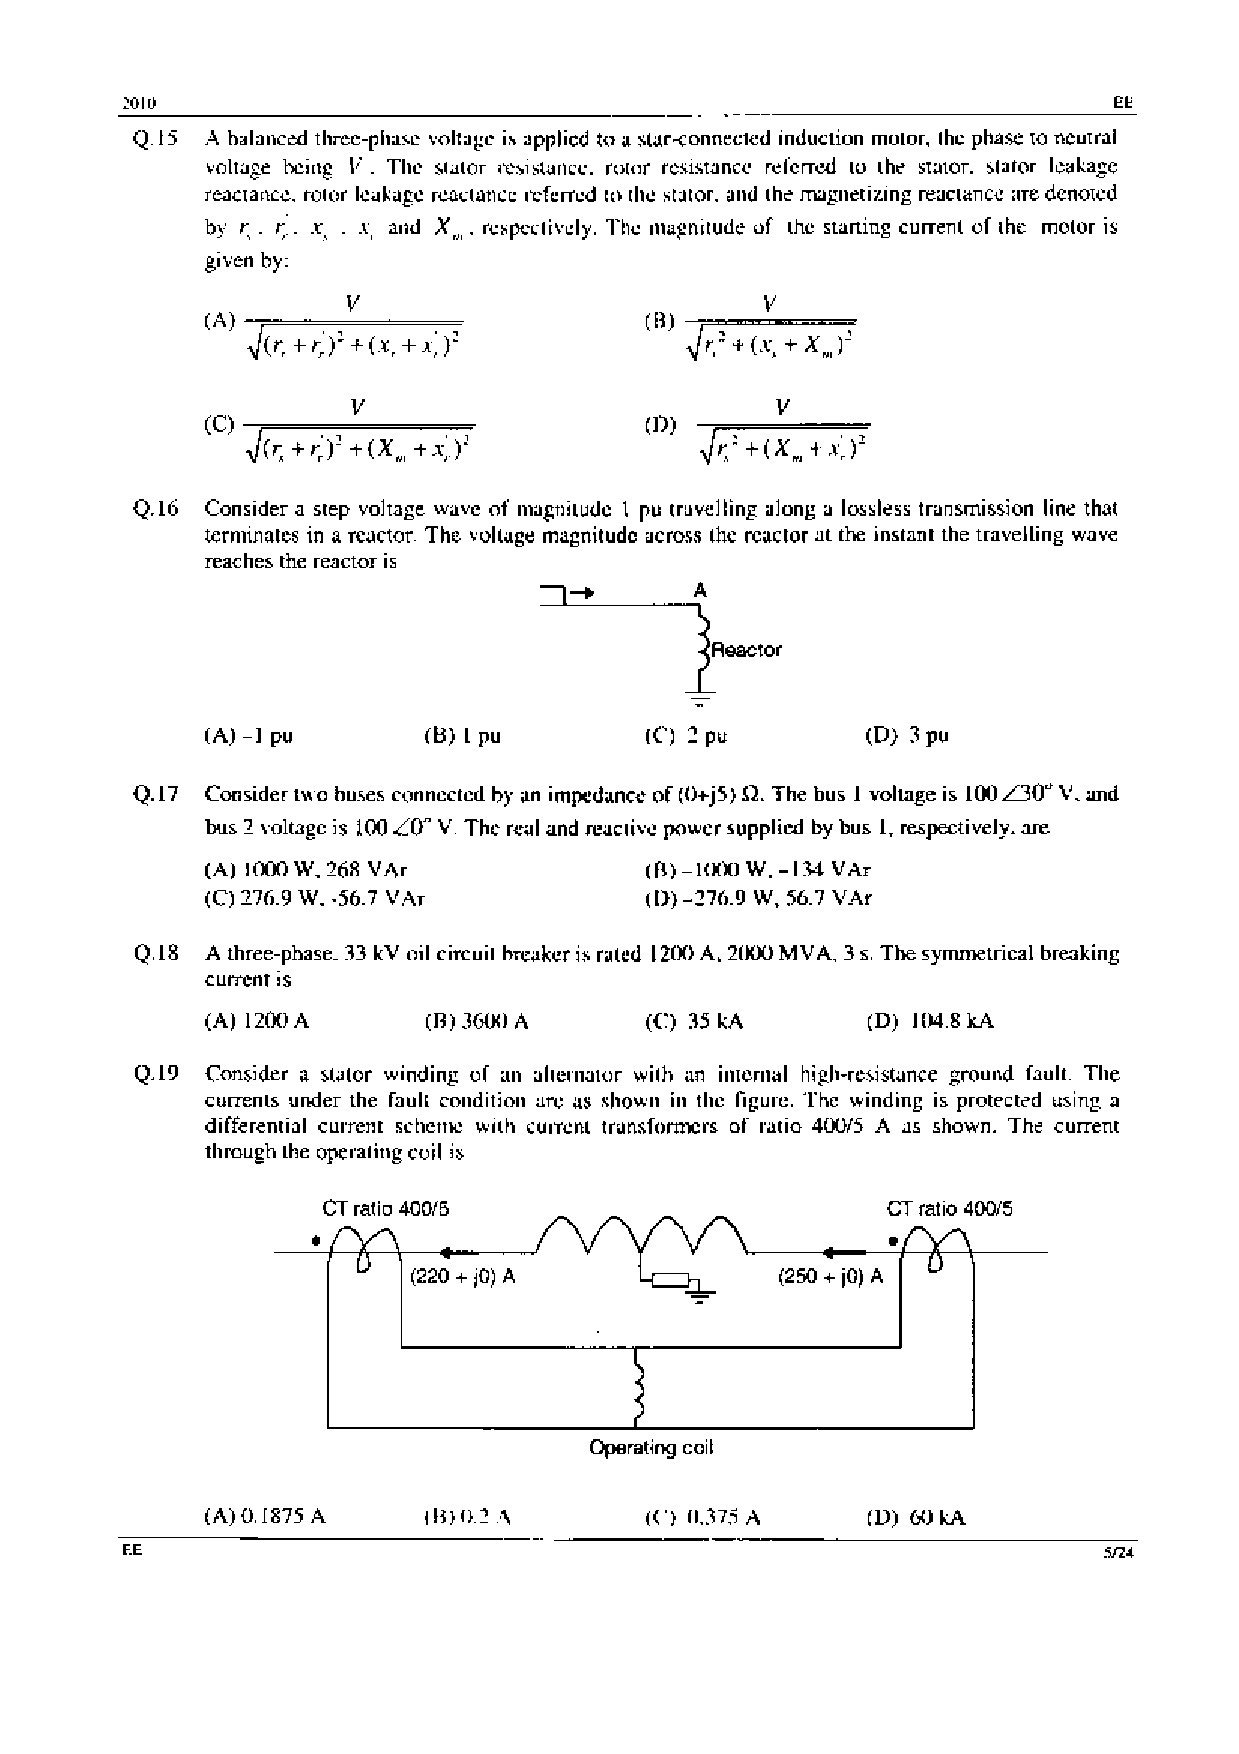 GATE Exam Question Paper 2010 Electrical Engineering 5